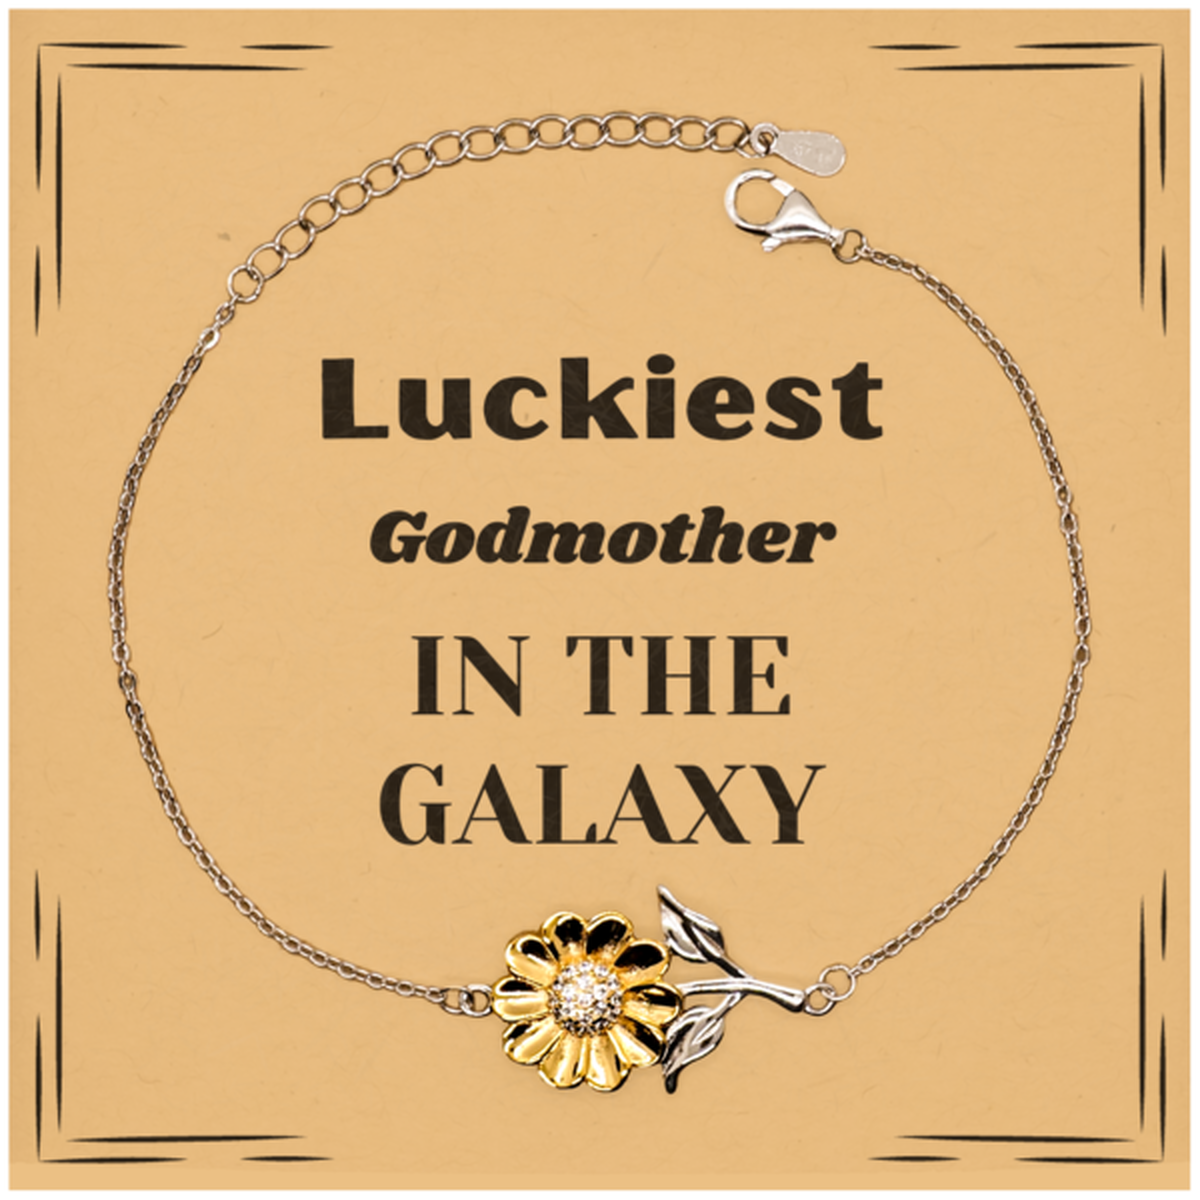 Luckiest Godmother in the Galaxy, To My Godmother Message Card Gifts, Christmas Godmother Sunflower Bracelet Gifts, X-mas Birthday Unique Gifts For Godmother Men Women